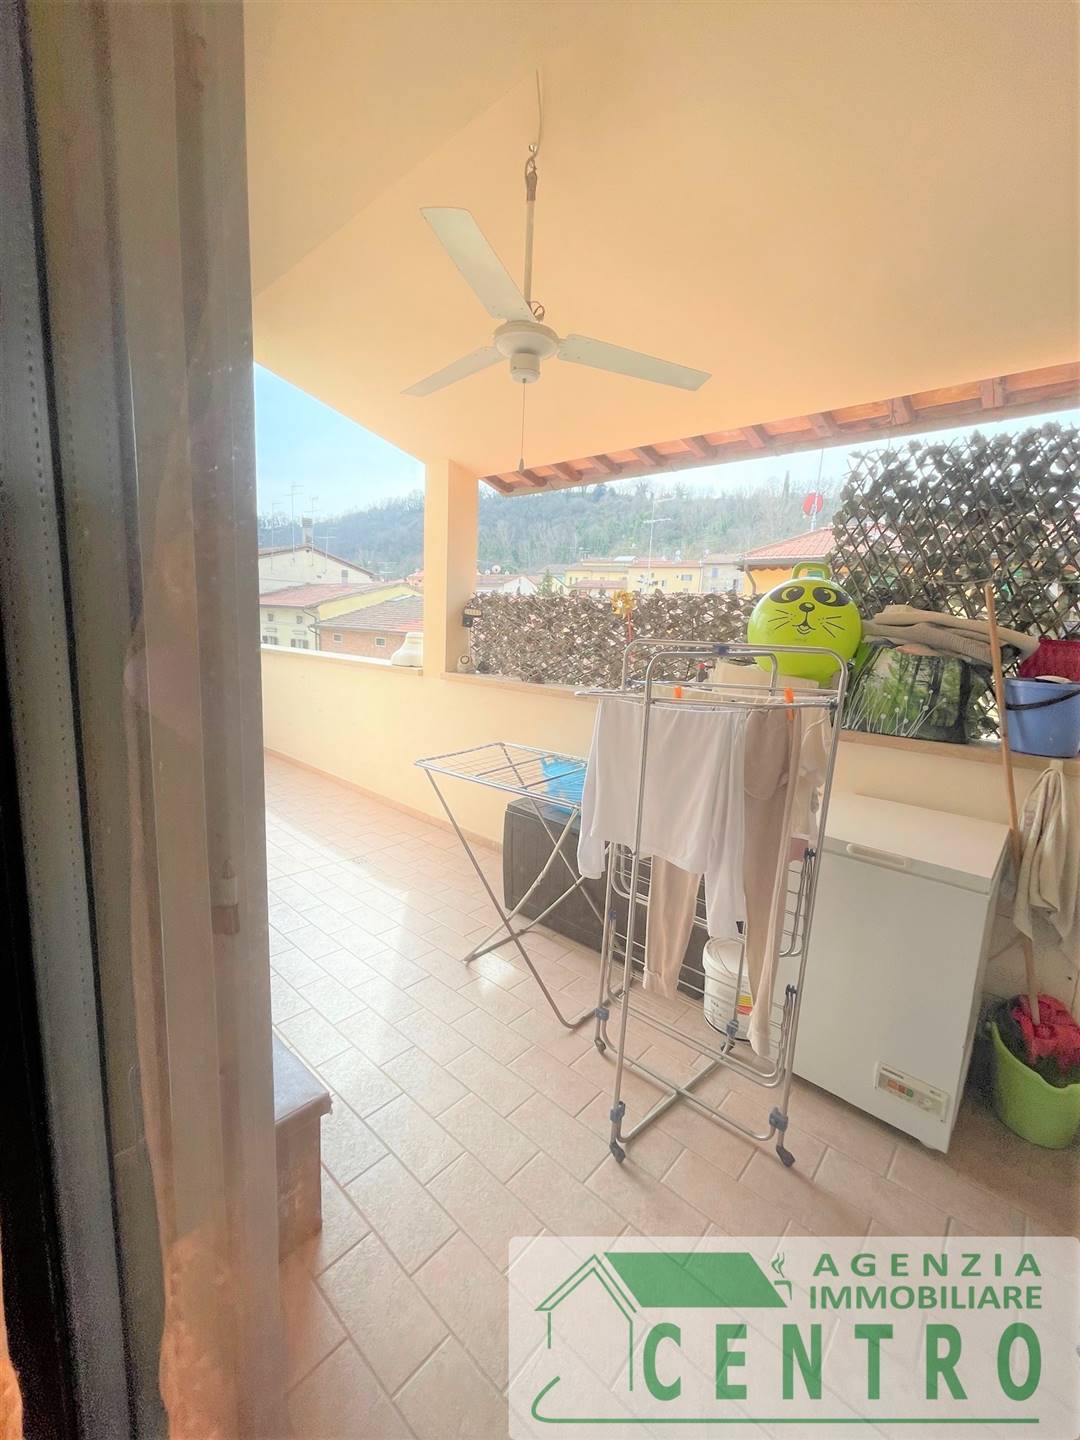 POGGIBONSI, Apartment for sale of 78 Sq. mt., Almost new, Heating Individual heating system, Energetic class: B, Epi: 93,96 kwh/m2 year, placed at 2° 